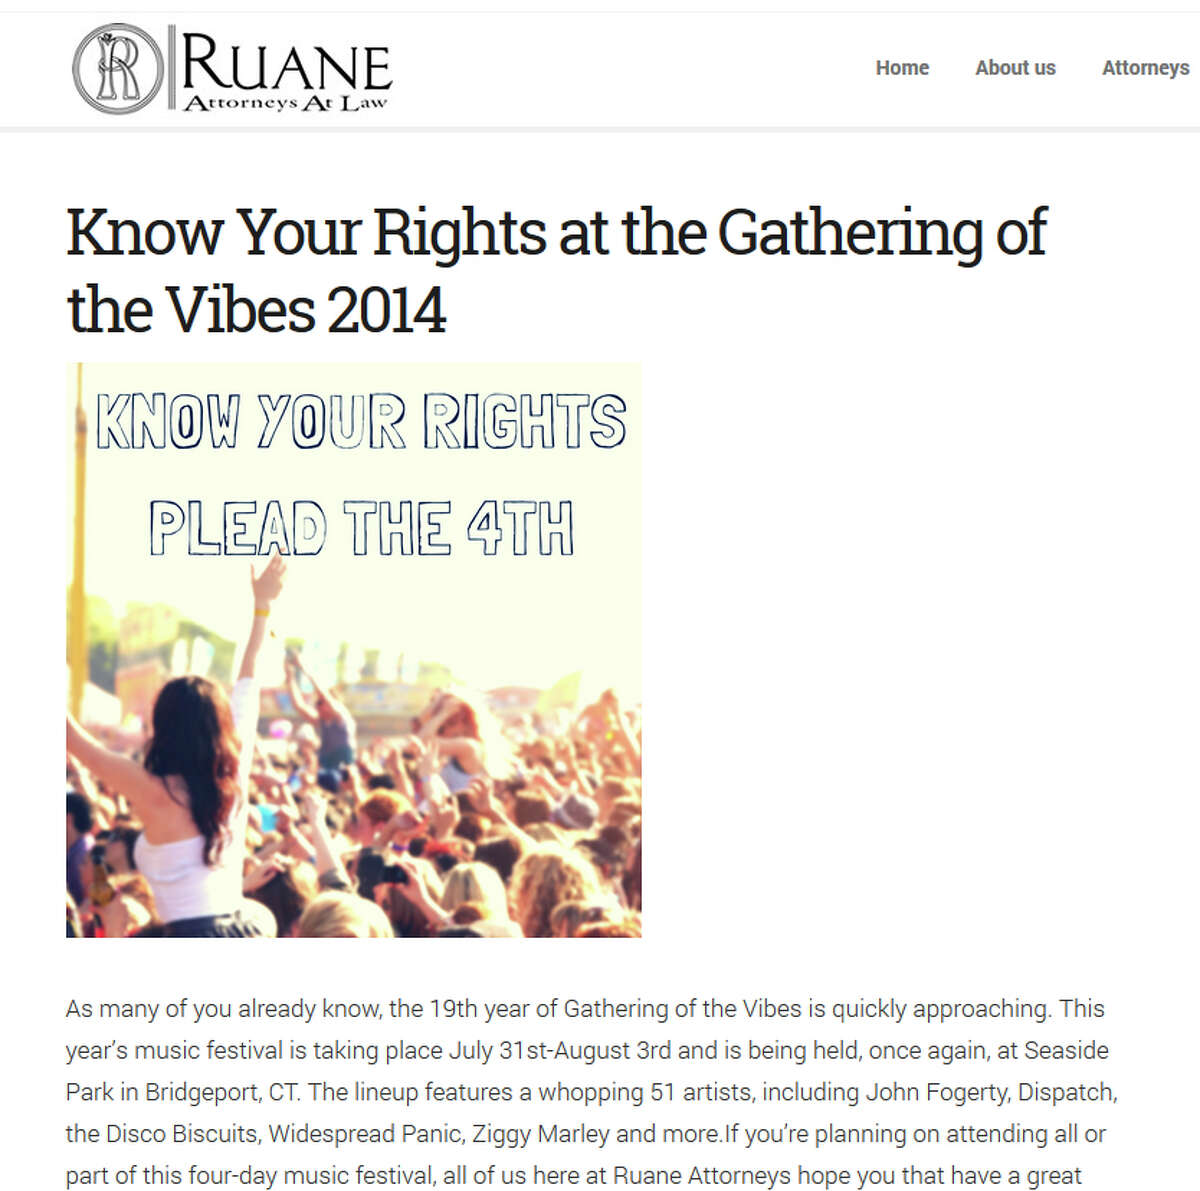 A screen grab from Ruane Attorneys at Law website reaches out to the crowd at the Gathering of the Vibes music festival going on this weekend, July 31 - Aug. 3, 2014.